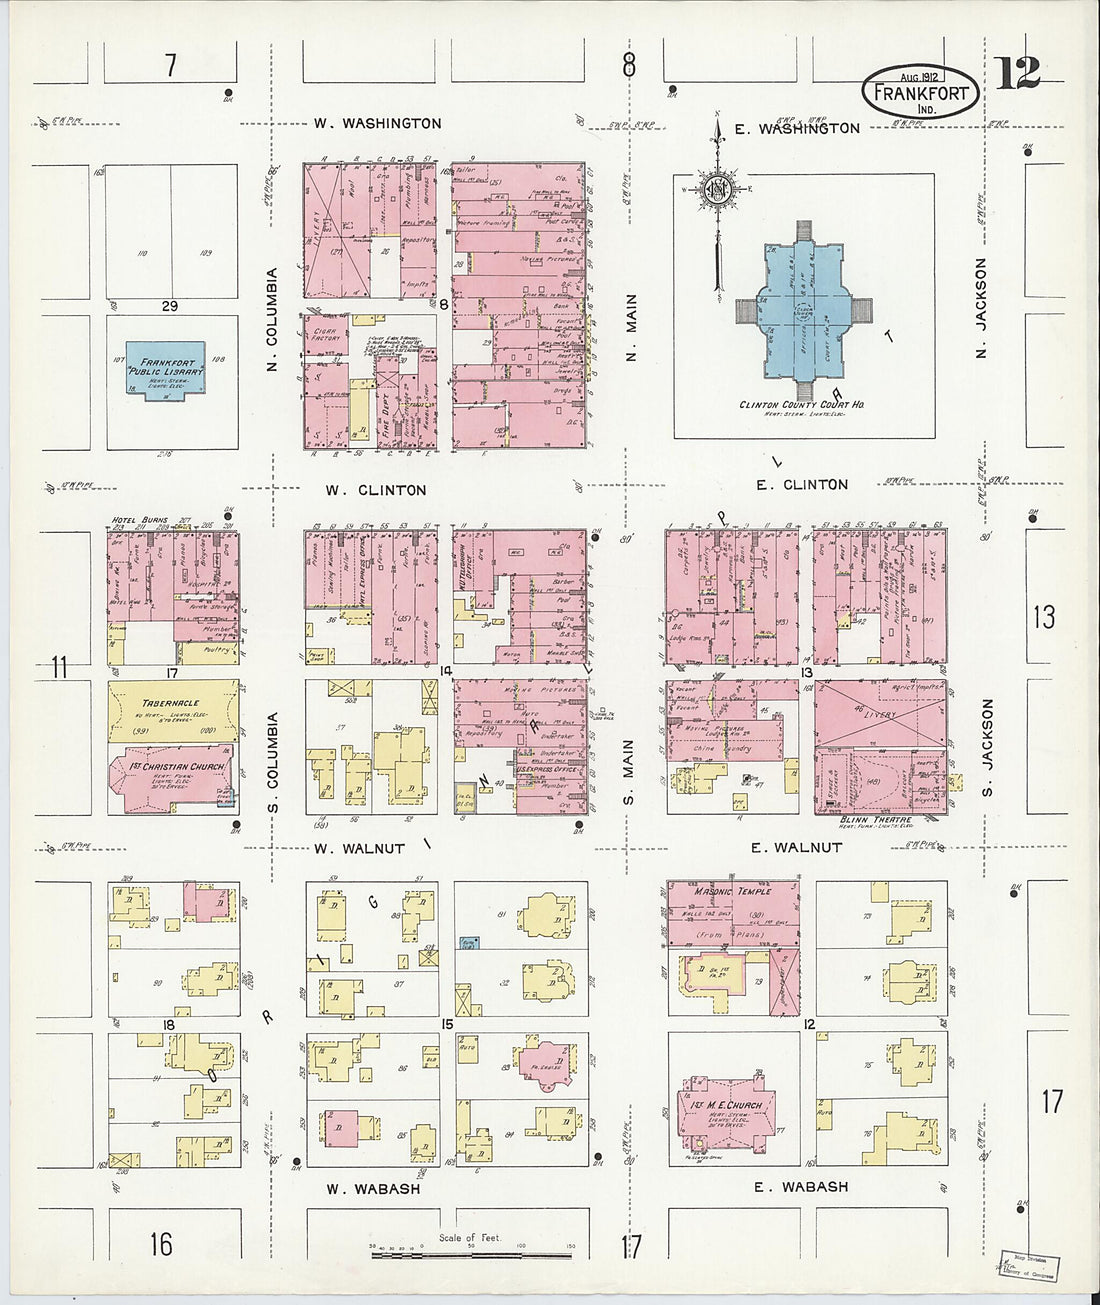 This old map of Frankfort, Clinton County, Indiana was created by Sanborn Map Company in 1912